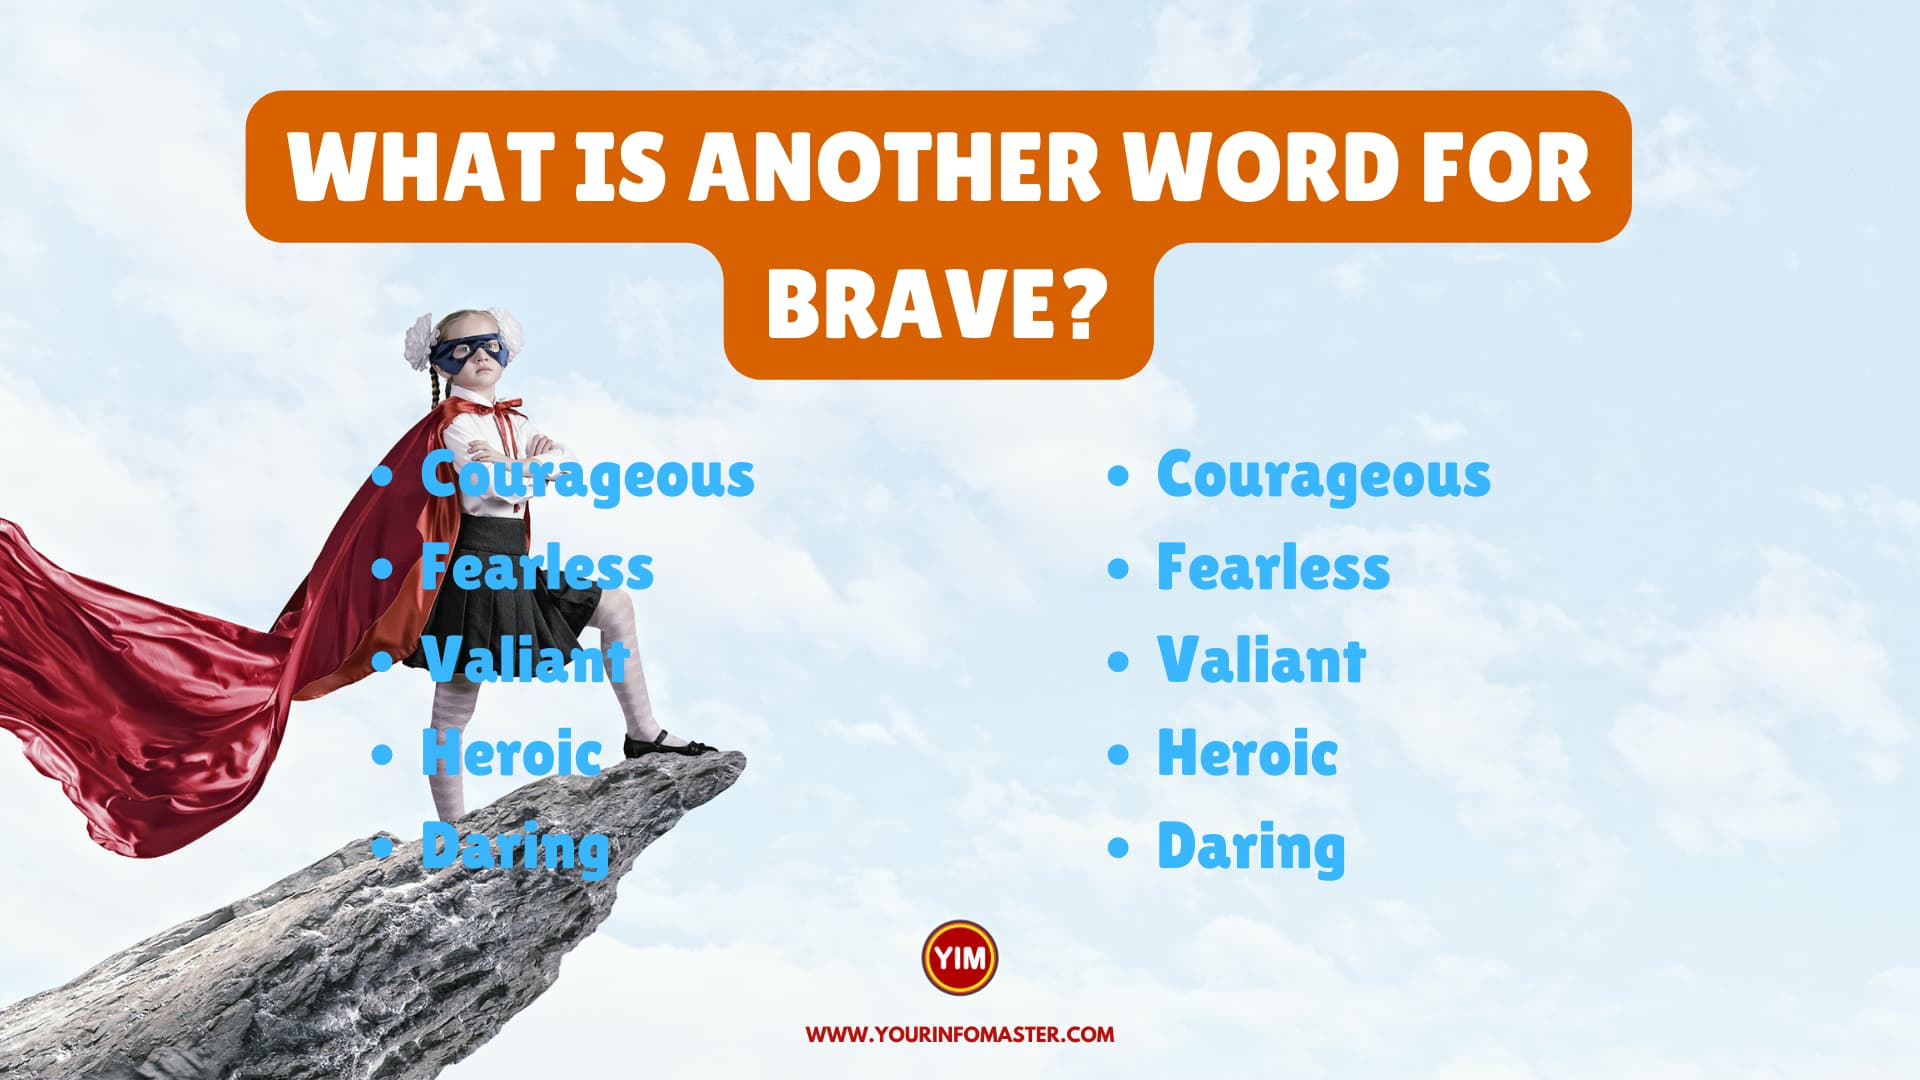 What is another word for Brave